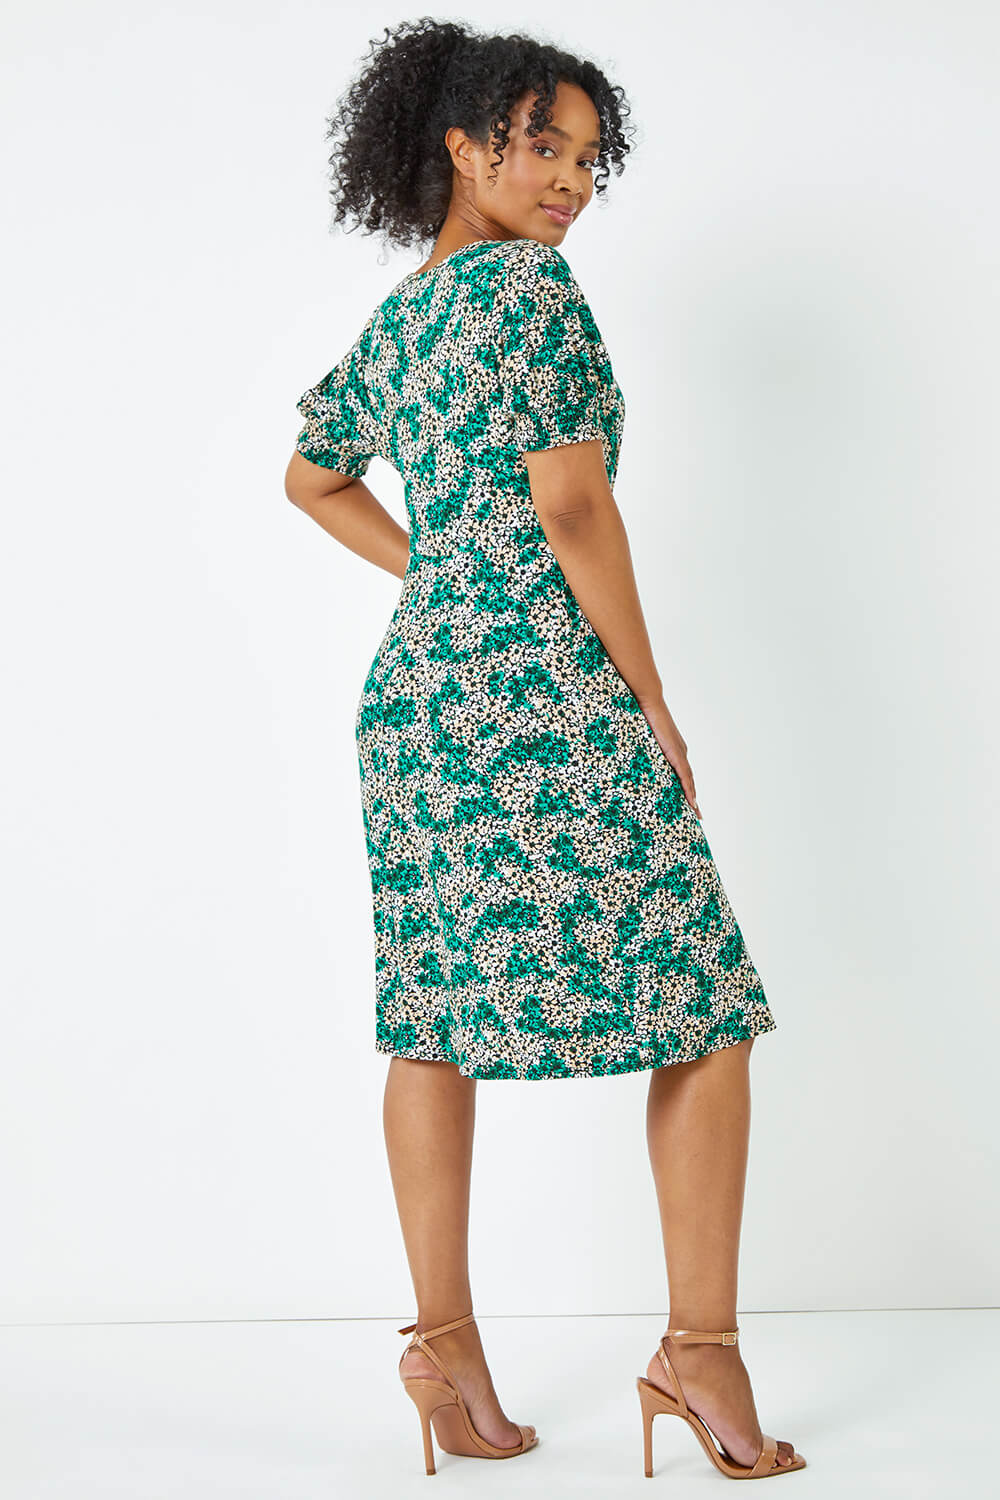 Green Petite Shirred Sleeve Floral Dress, Image 3 of 5